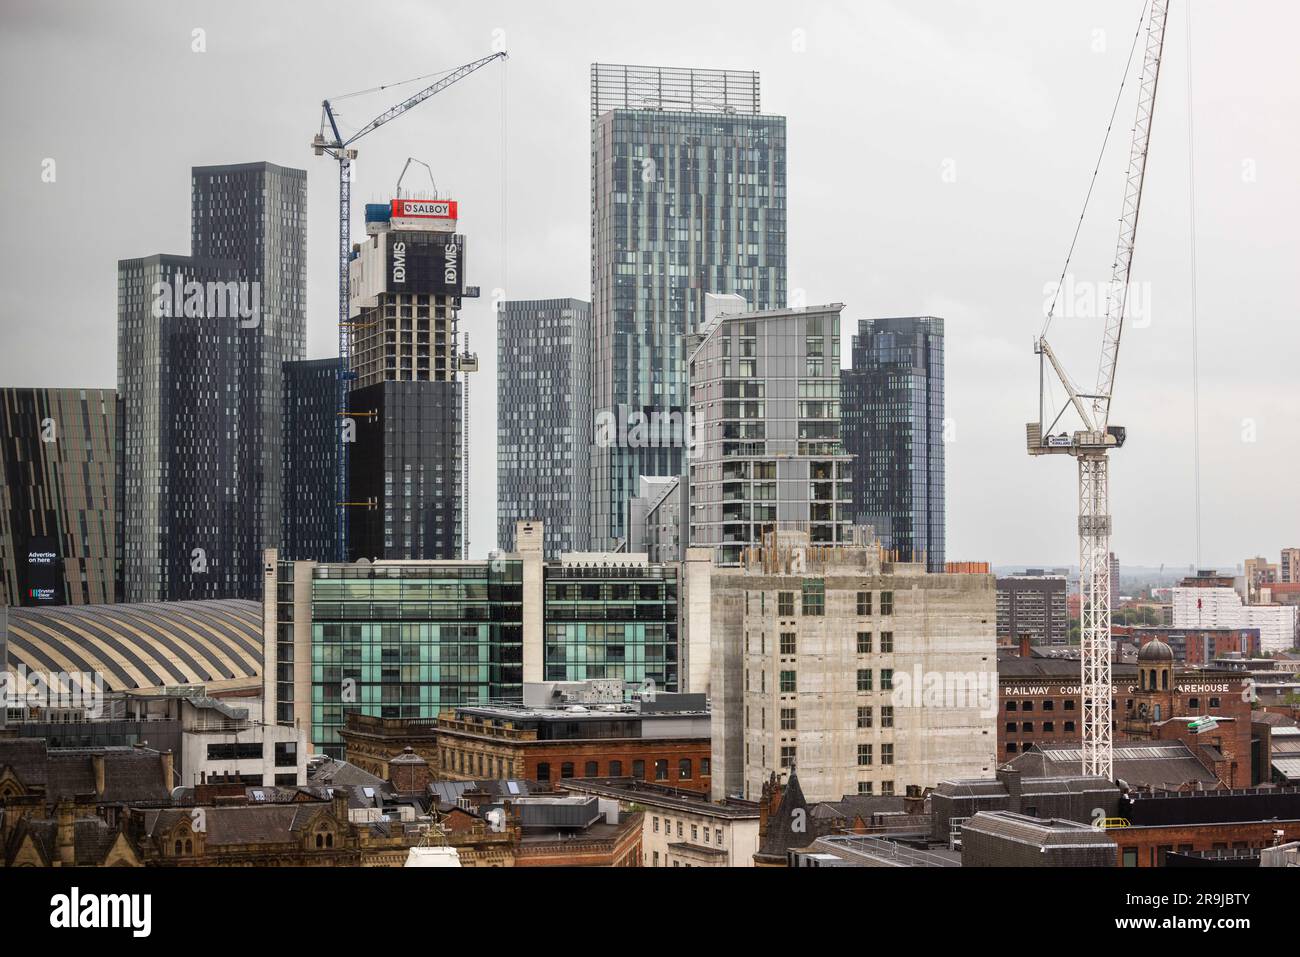 Buildings in Manchester. Stock Photo